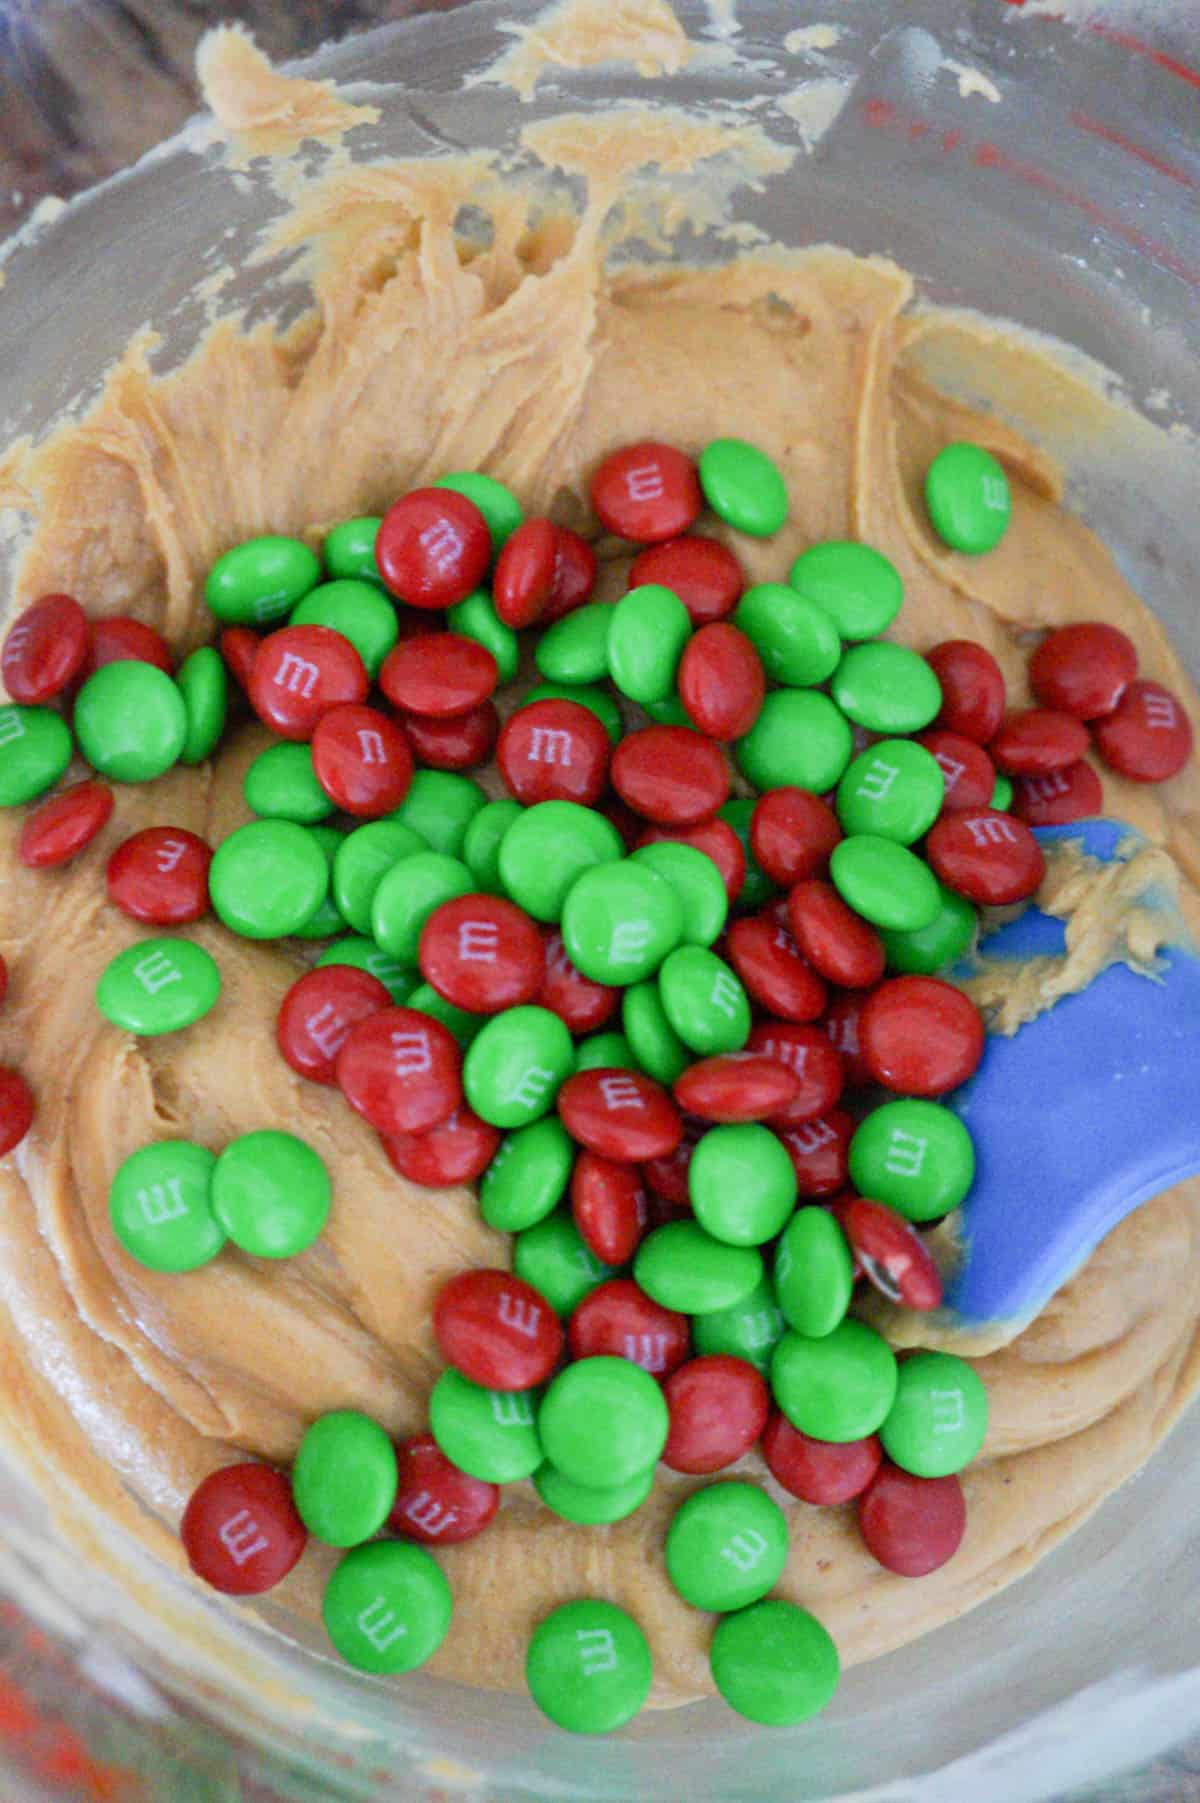 red and green M&M's on top of creamy peanut butter mixture in a bowl